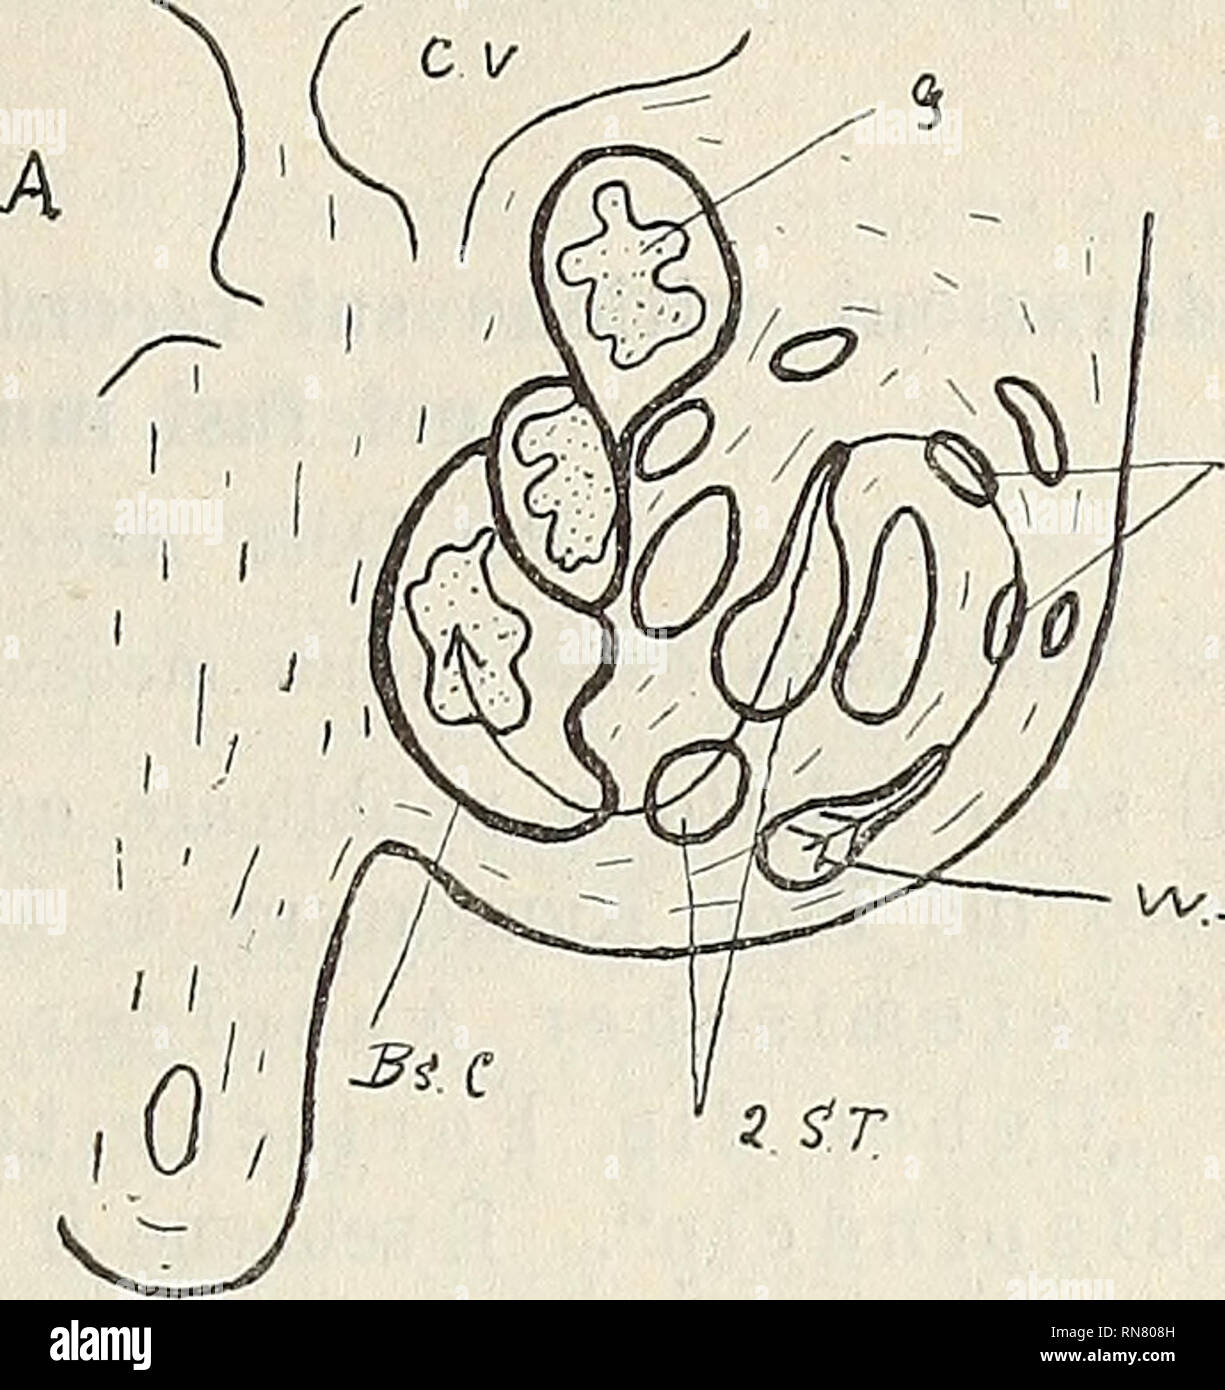 . Anatomischer Anzeiger. Anatomy, Comparative. / S!7? Fig. 5. Rabbits embryo 11 days old. From the Wolffian duct the tubule bends inwards and then makes a sharp bend forwards. On the convexity of this bend the future glomerulus forms (G), and moulded on the bend the Bowman's capsule is also seen (Bs. C). Fig. 6. Eabbits embryo 14 days old. The Wolffian duct opens into narrow col- lecting tubules (1 ST), these into larger tubules (2 ST) and these again into Malpighian bodies. The three Malpighian bodies represented in figure all open in this way into Wolffian duct. be seen, and corresponding wi Stock Photo